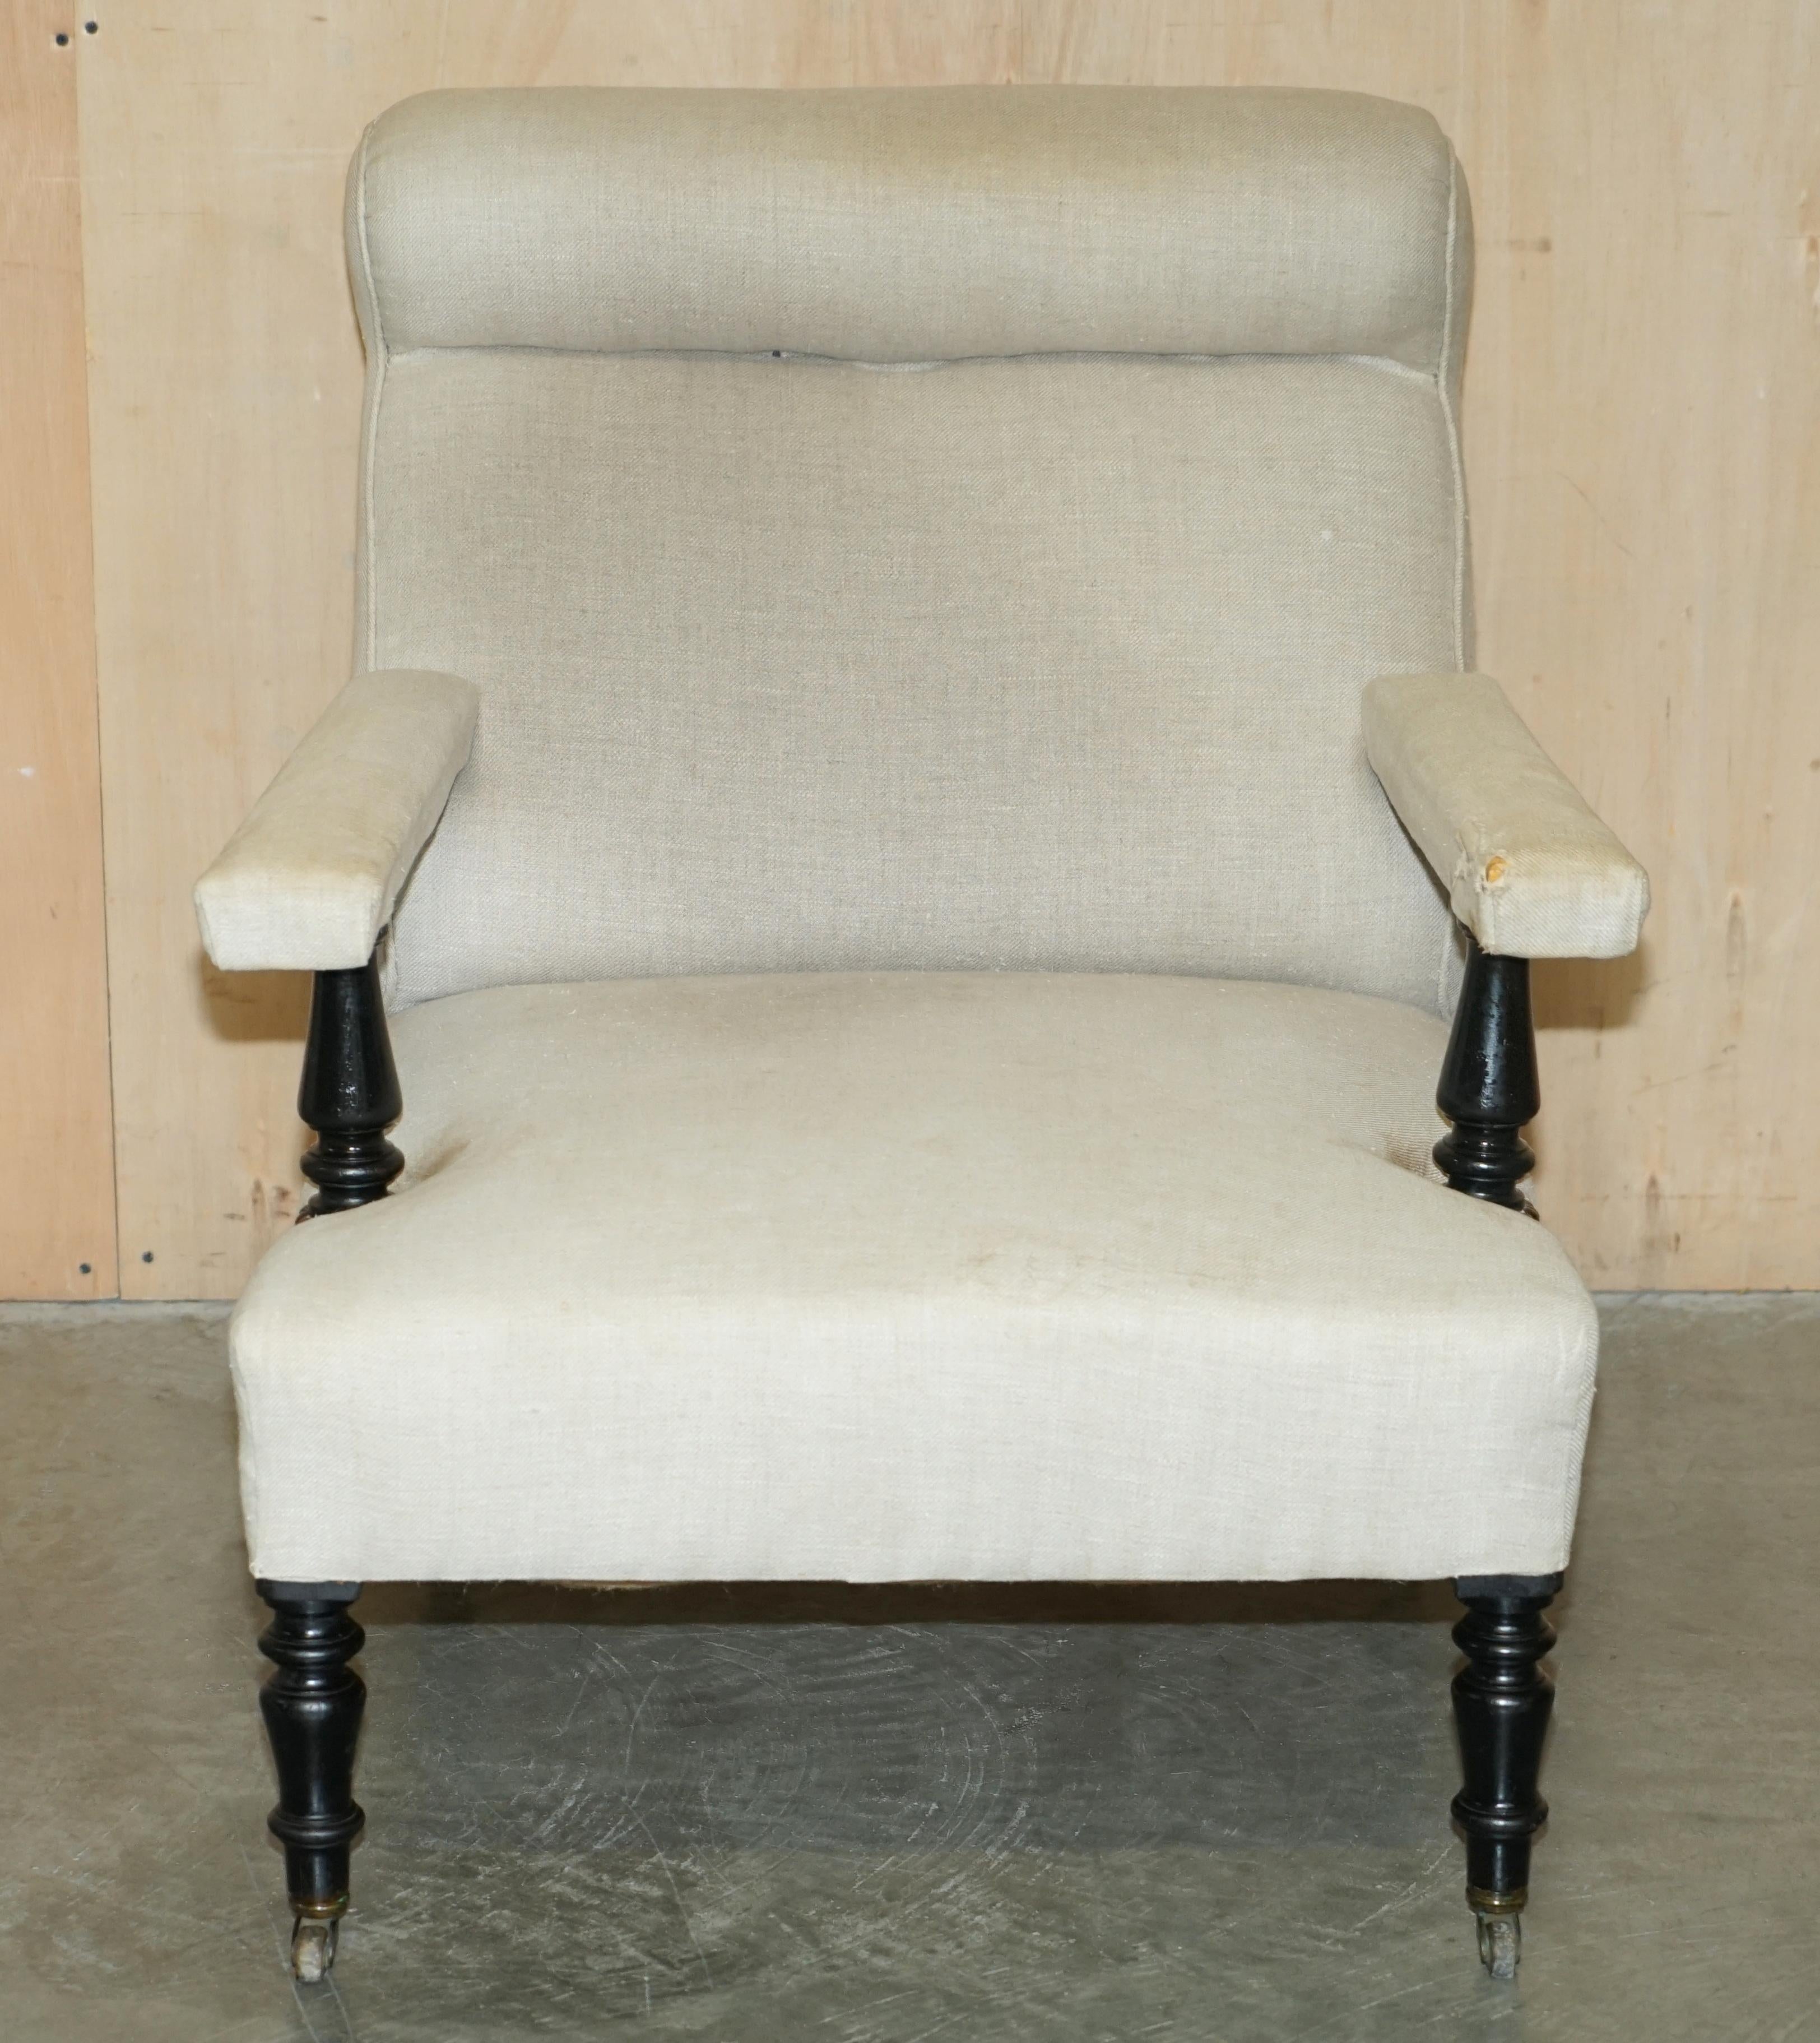 Royal House Antiques

Royal House Antiques is delighted to offer for sale this  original Victorian circa 1870 Library reading armchair for restoration / reupholstery 

Please note the delivery fee listed is just a guide, it covers within the M25